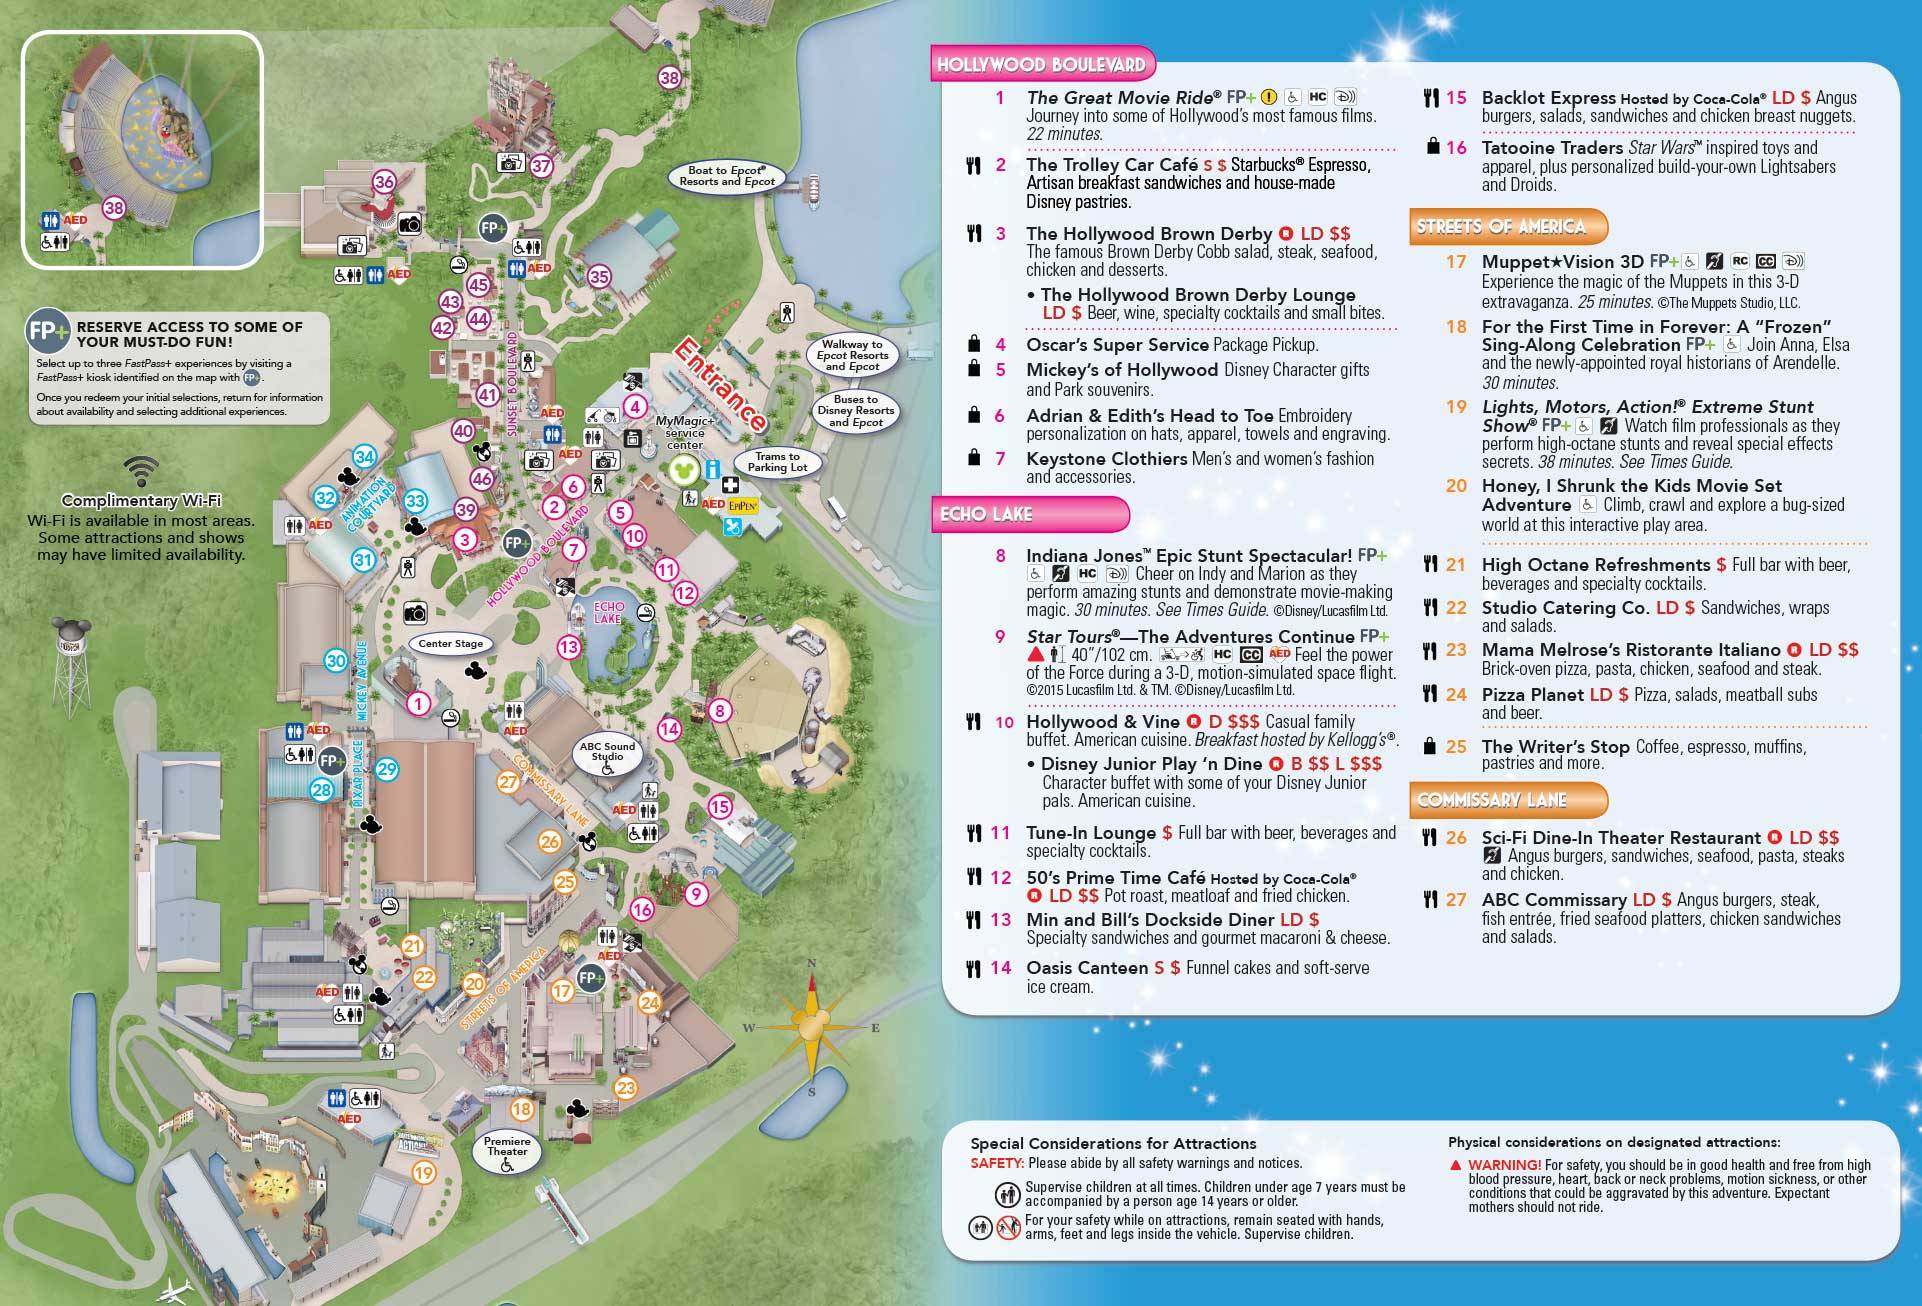 PHOTO - New Disney's Hollywood Studios guide map updated with Center Stage addition